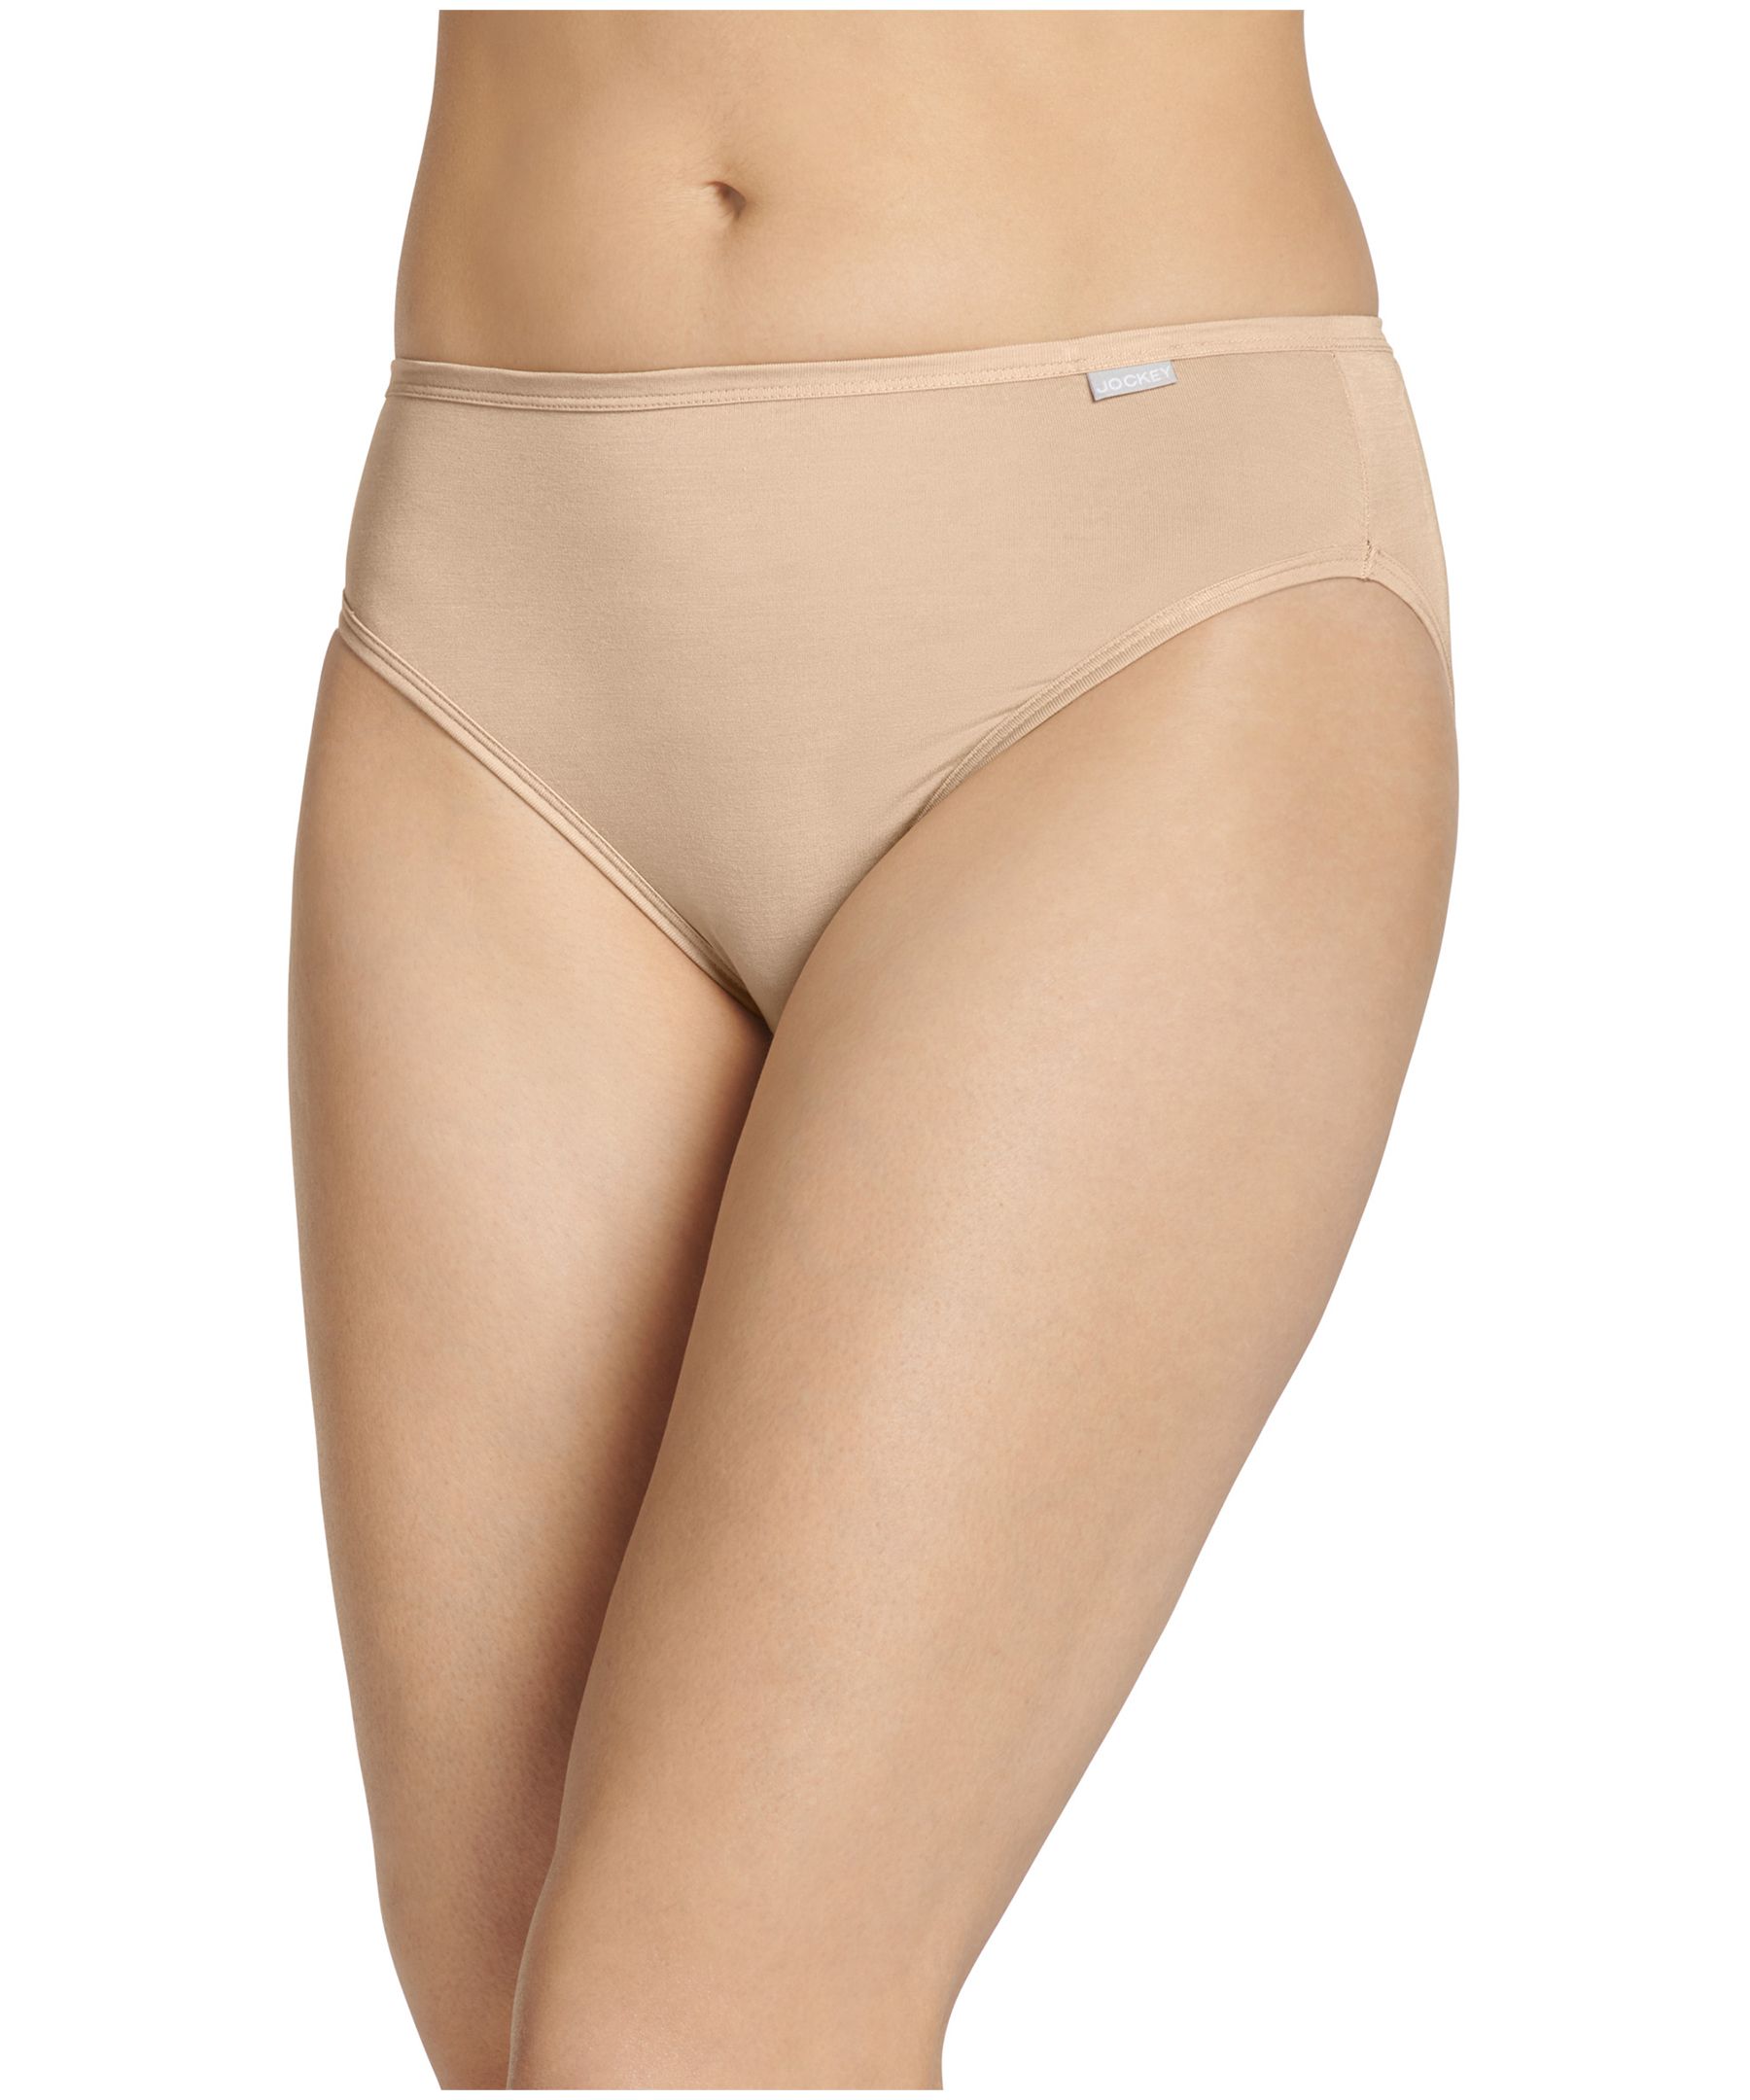 Police Auctions Canada - Women's Jockey Elance French Cut Panties, 3 Pack - Size  9/XXL (516969L)